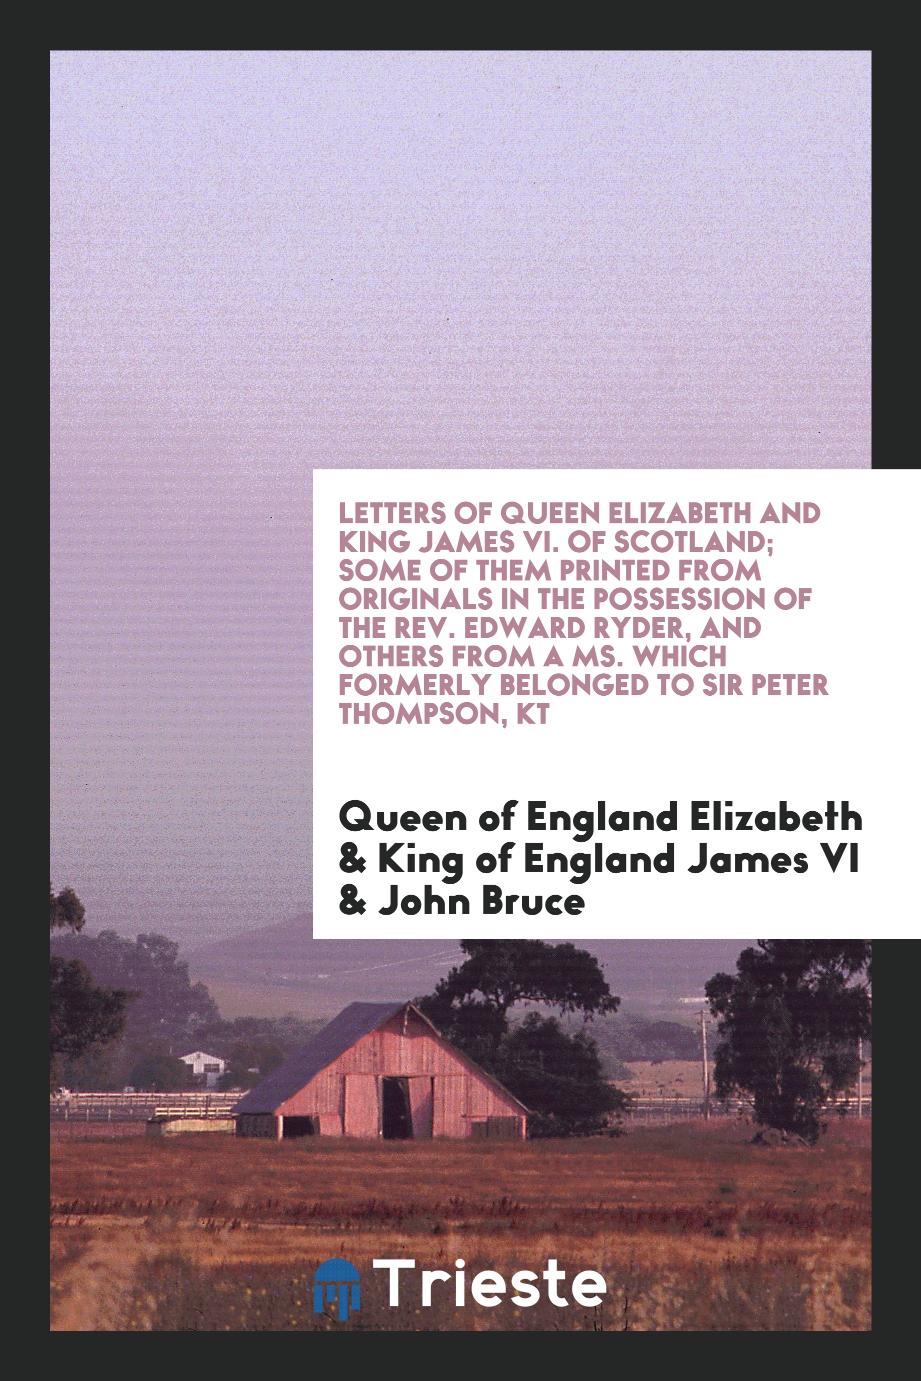 Letters of Queen Elizabeth and King James VI. of Scotland; some of them printed from originals in the possession of the Rev. Edward Ryder, and others from a ms. which formerly belonged to Sir Peter Thompson, kt